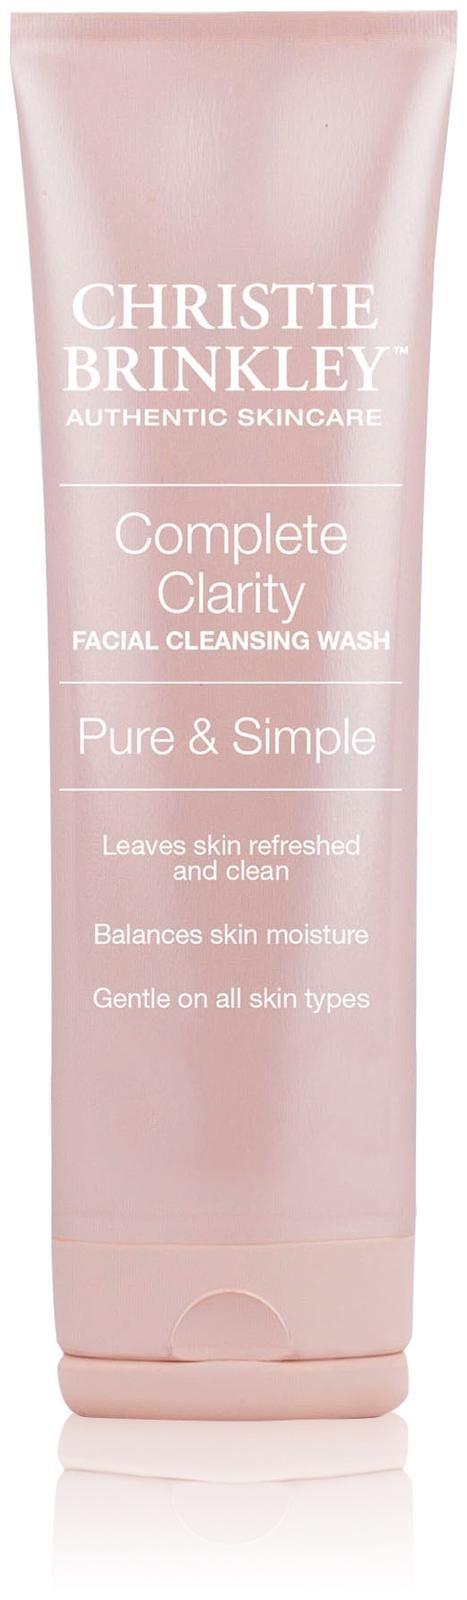 Christie Brinkley Complete Clarity Facial Cleansing Wash - 3 Oz